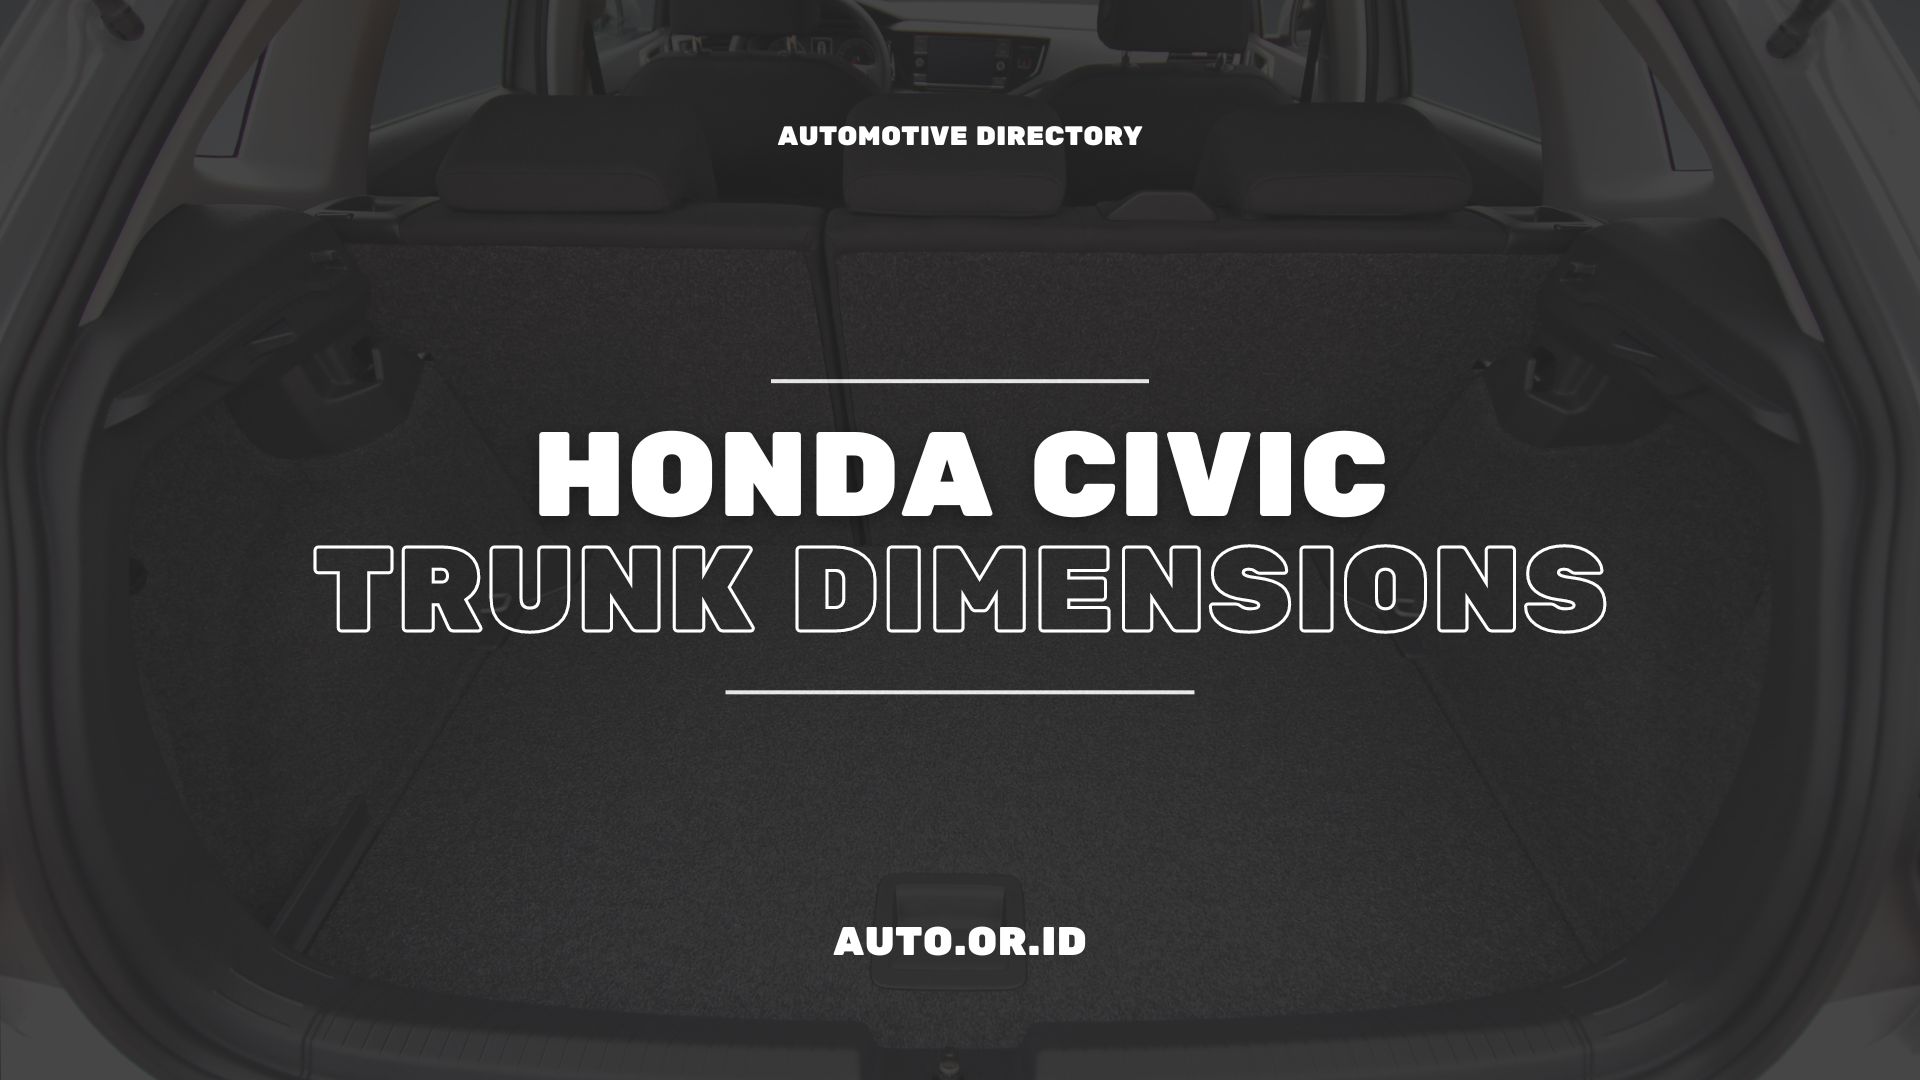 Honda Civic Trunk Dimensions A Look Inside the Boot Automobile Directory